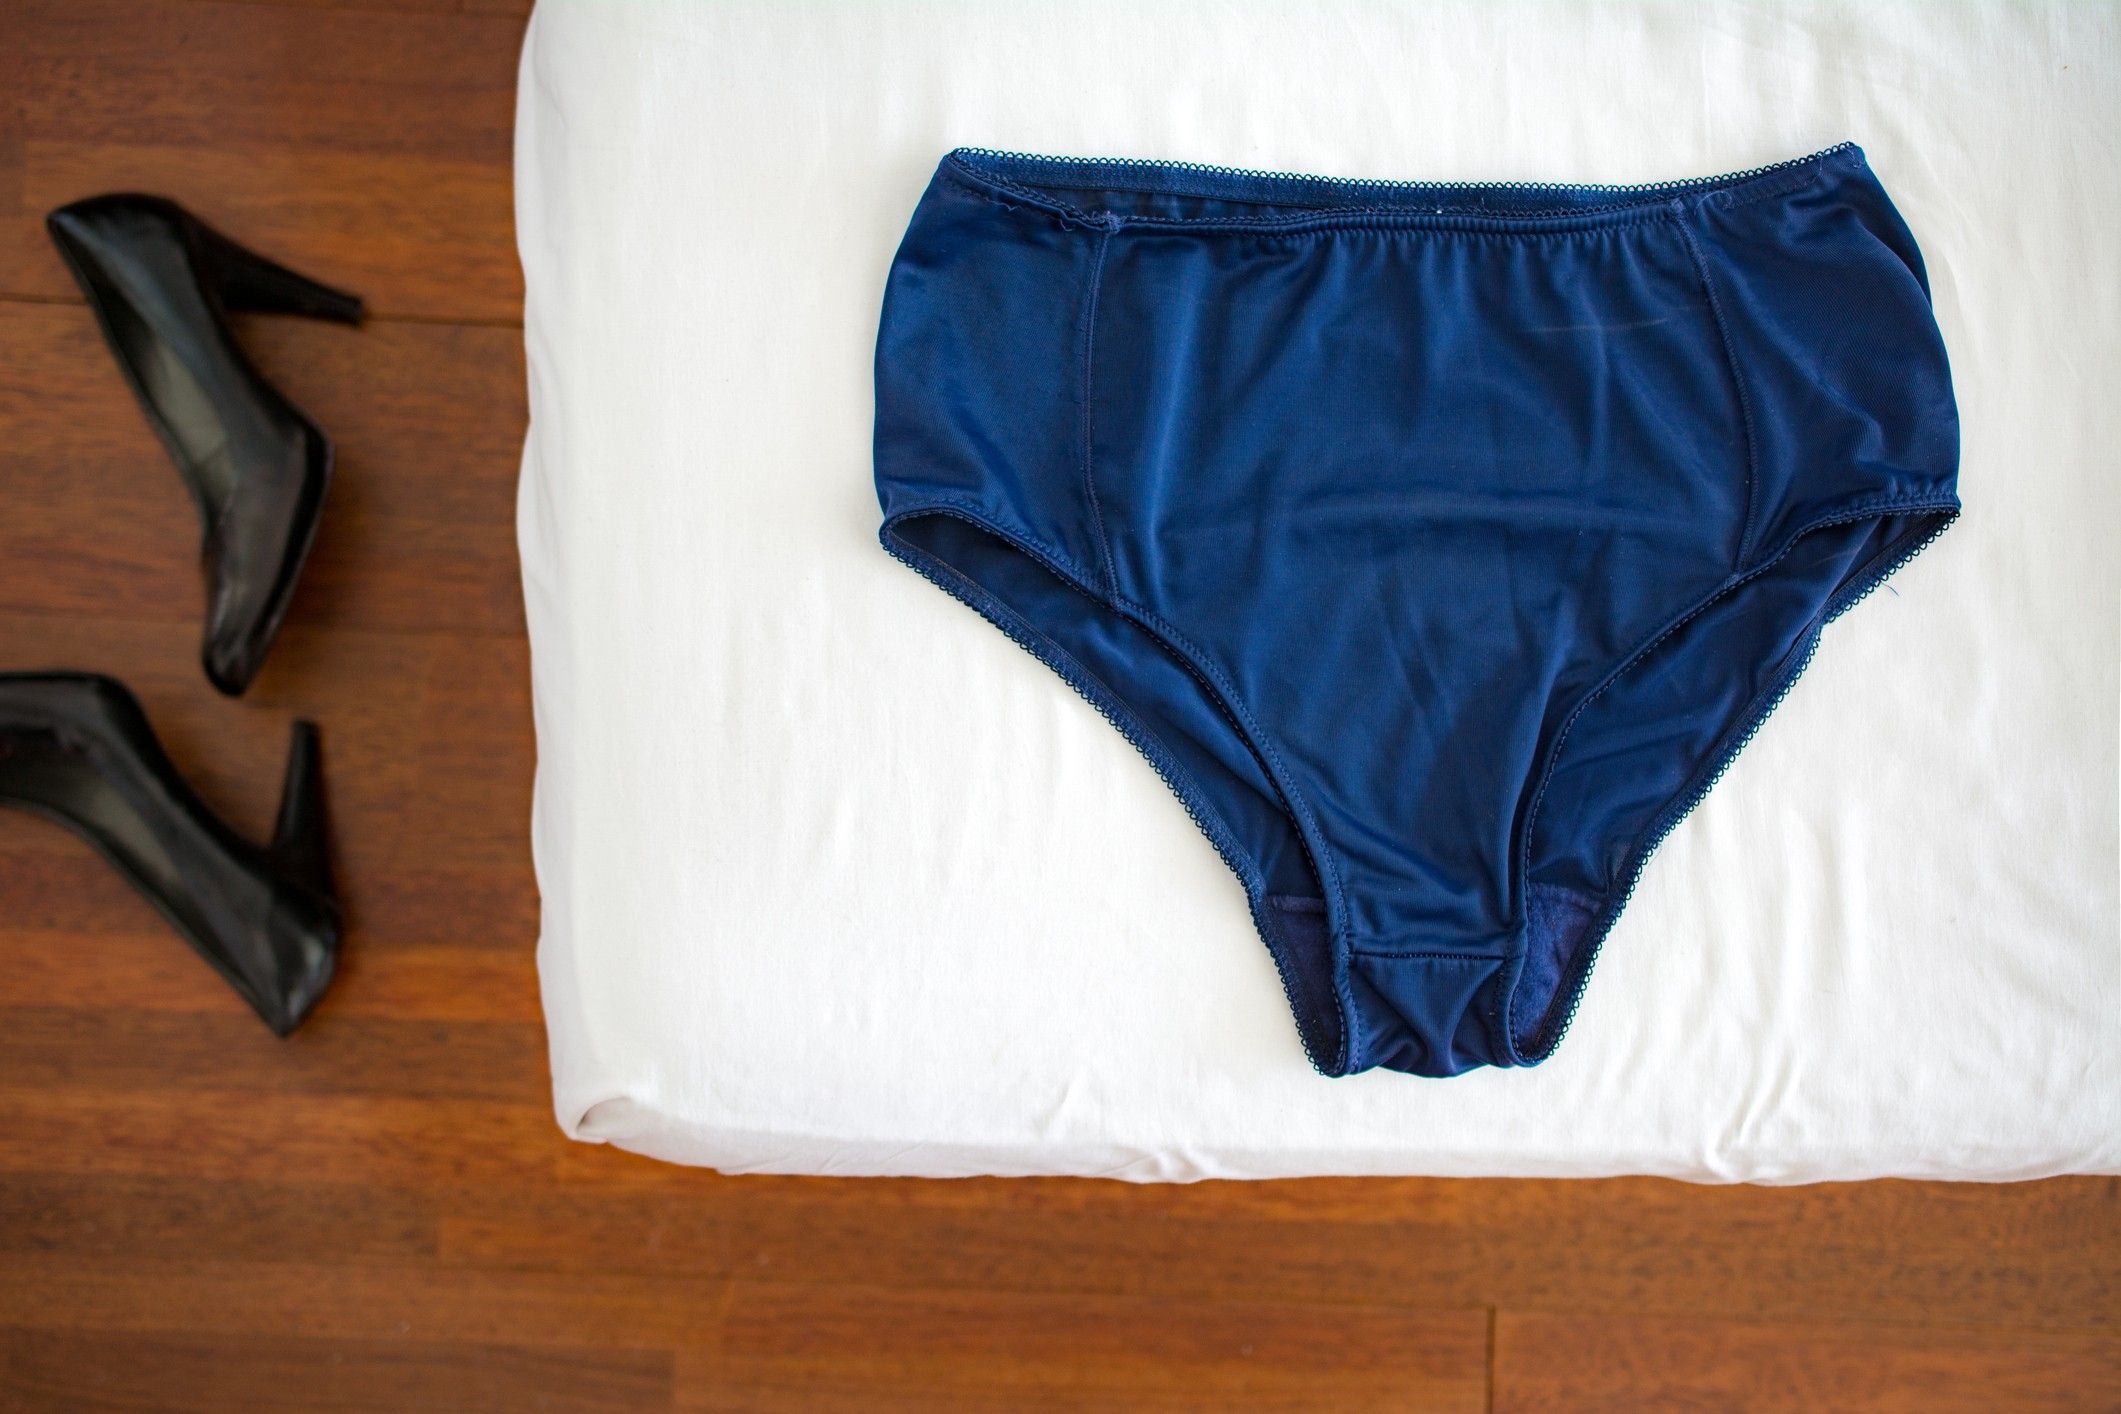 10 Women On Why They Stopped Wearing Panties Underwear pic